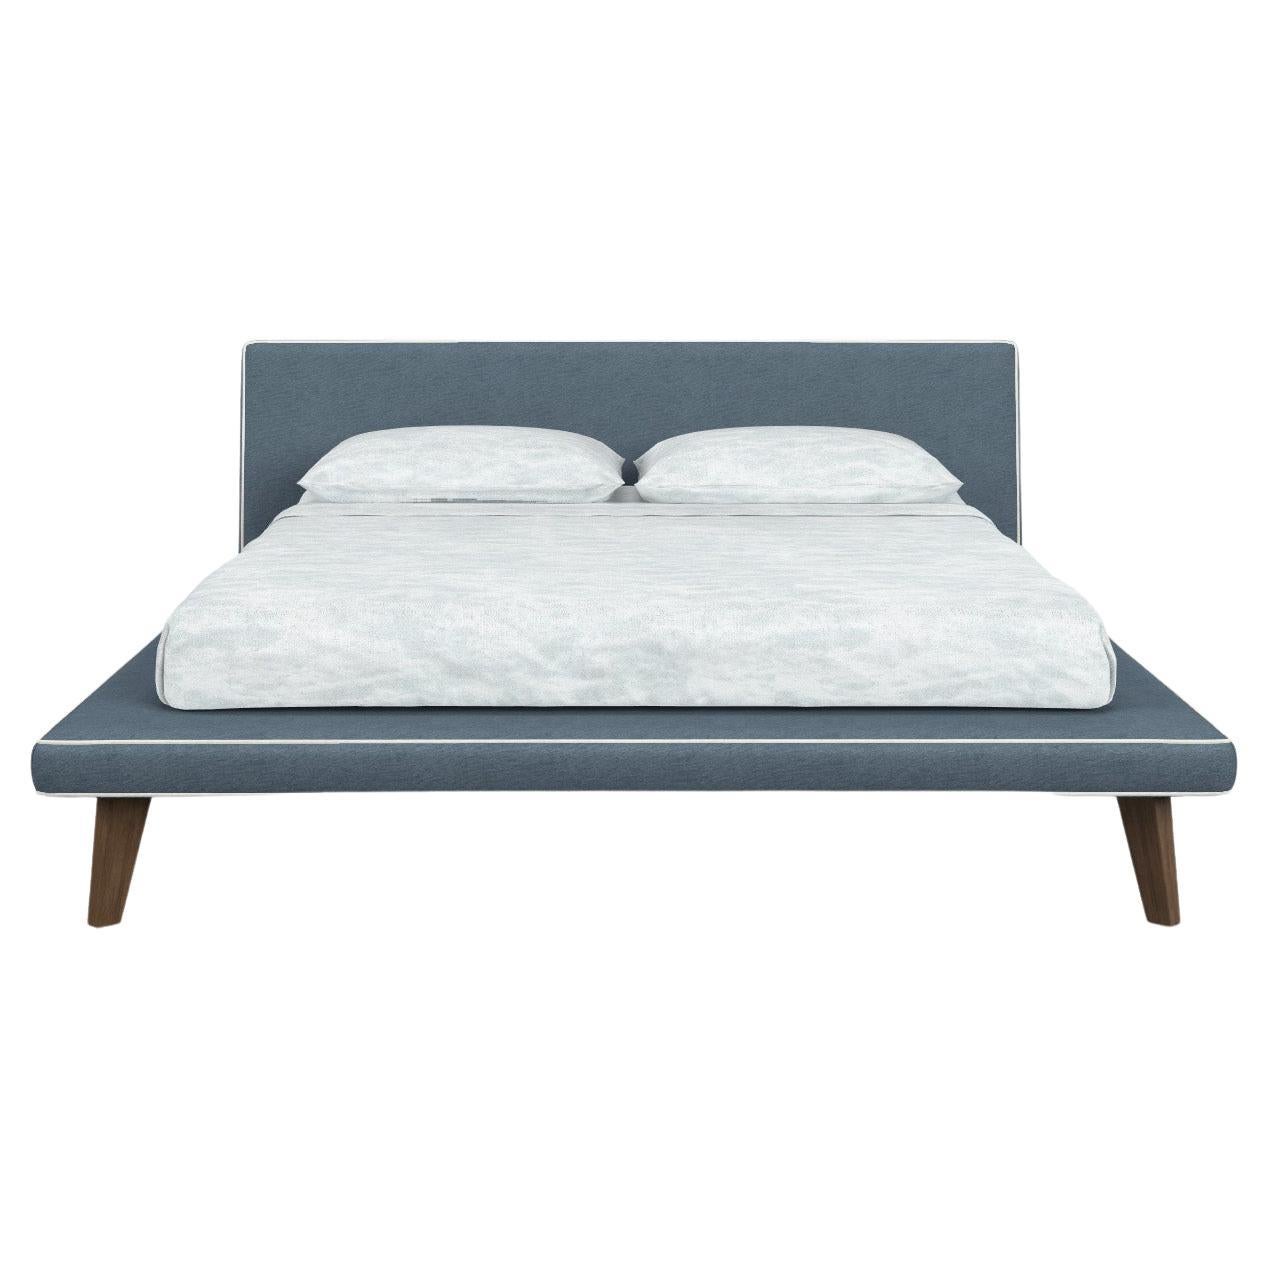 Gervasoni Tray Q Bed in Munch Upholstery & Walnut Feet by Paola Navone For Sale